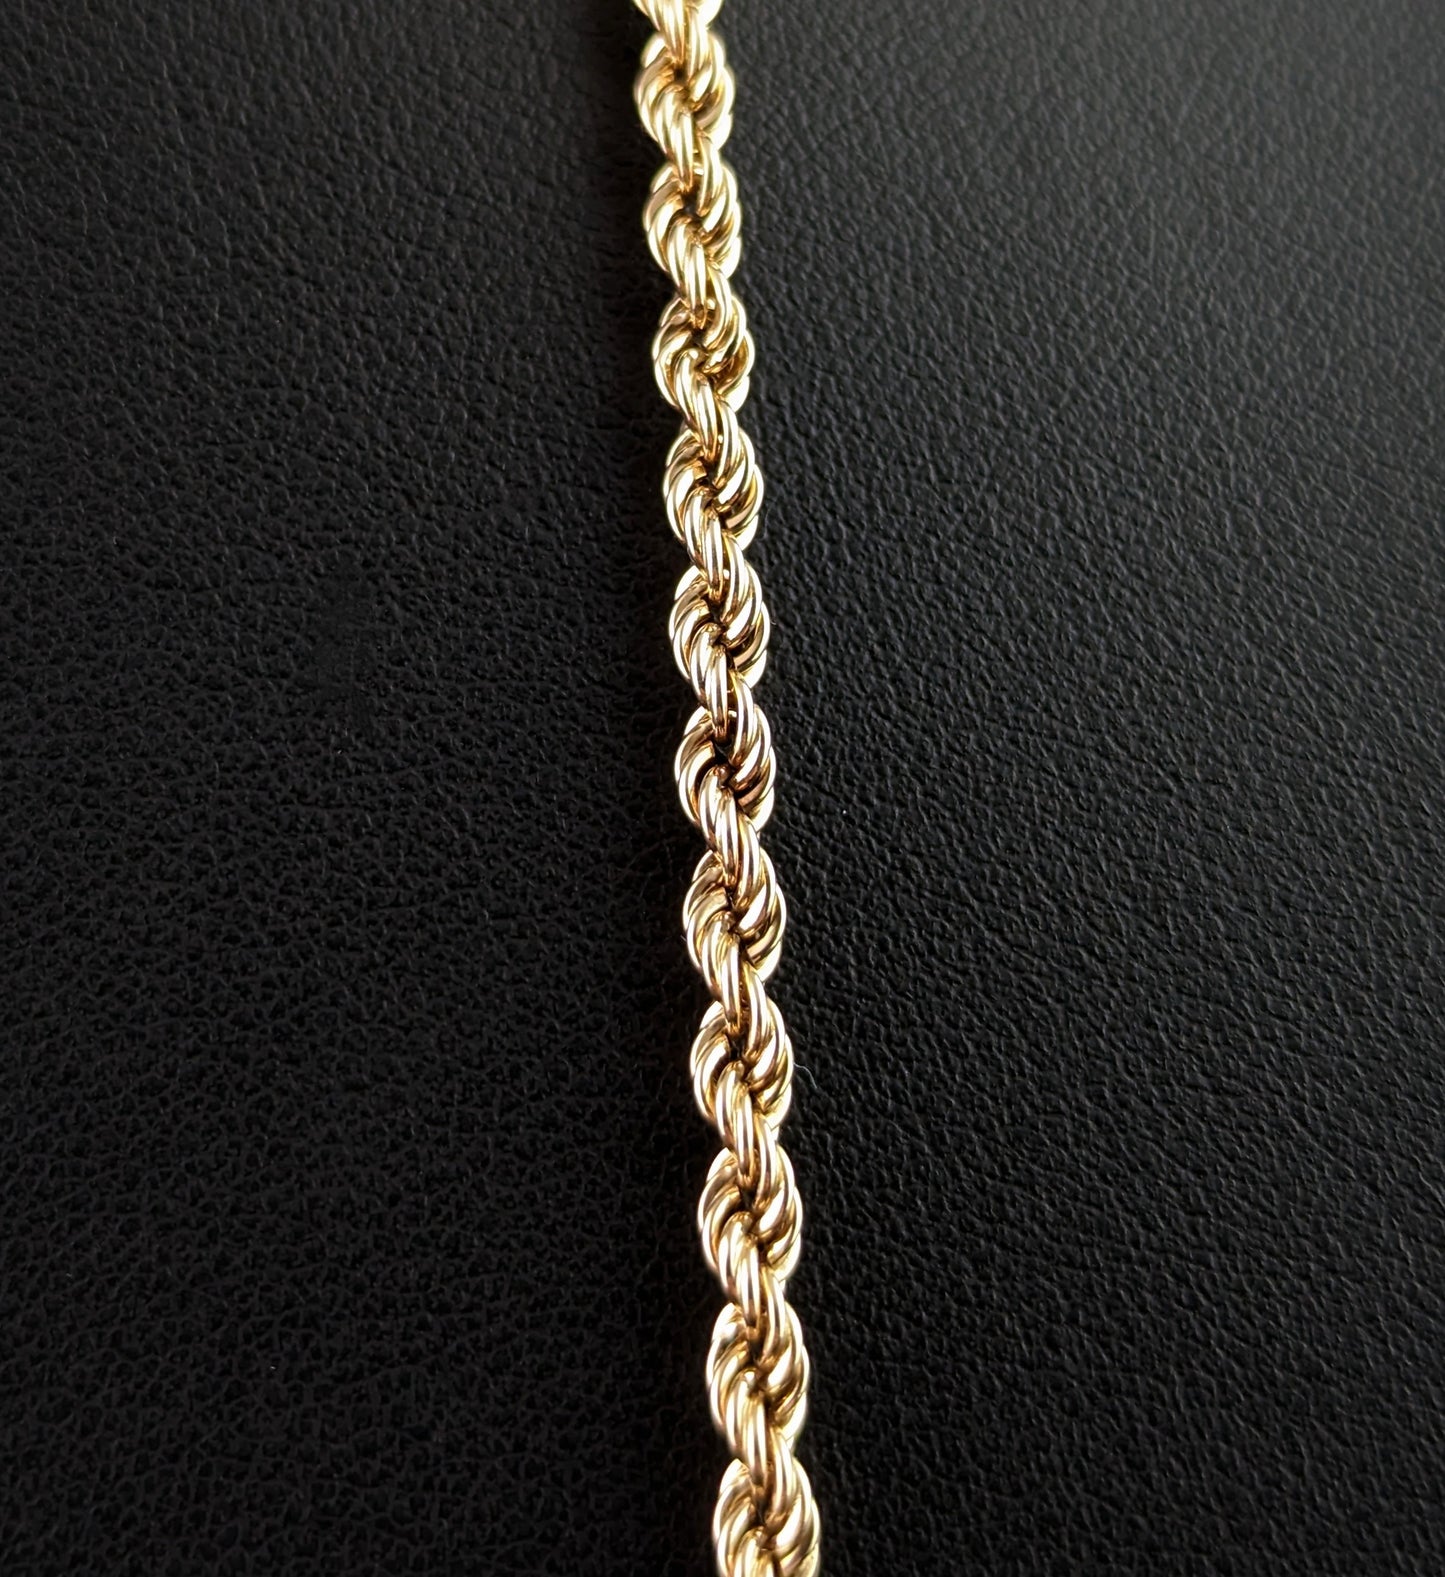 Vintage 9ct yellow gold rope twist chain necklace, long